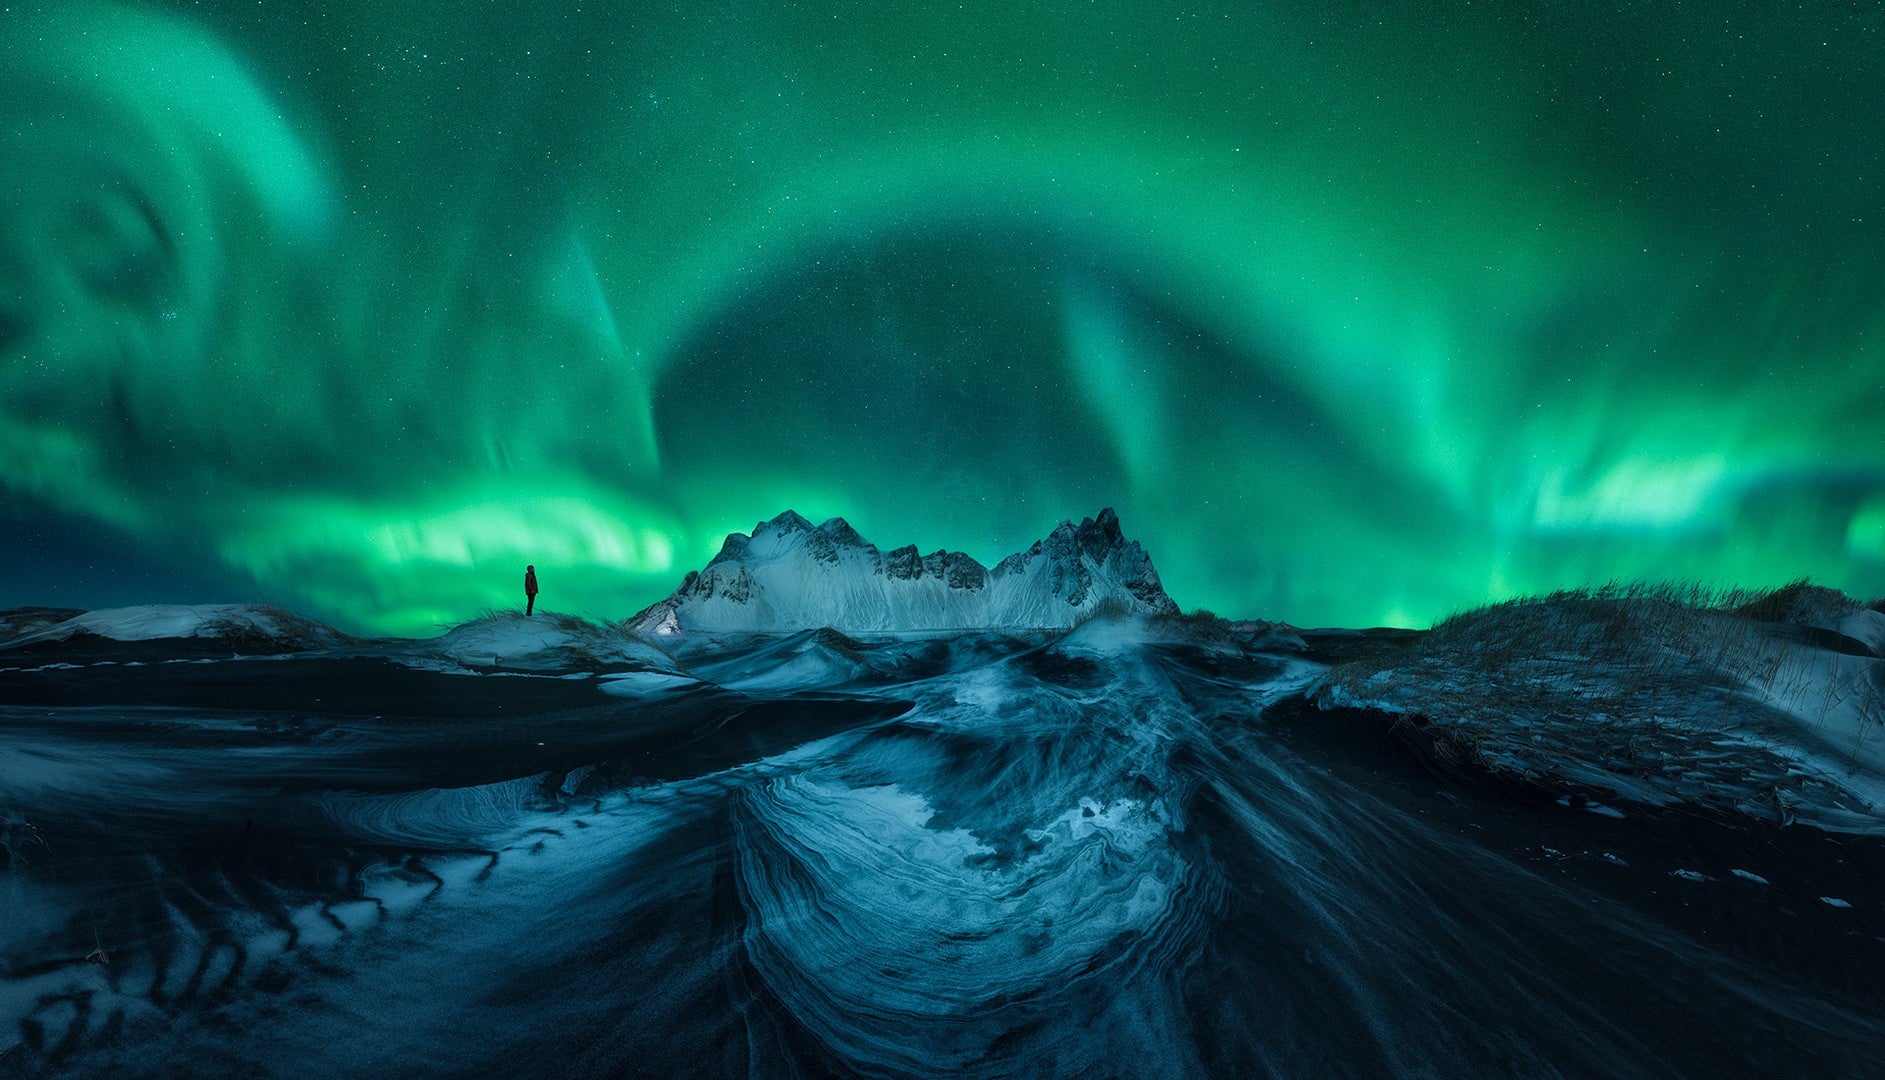 A person silhouetted under the Northern Lights. (Photo: Asier López Castro)